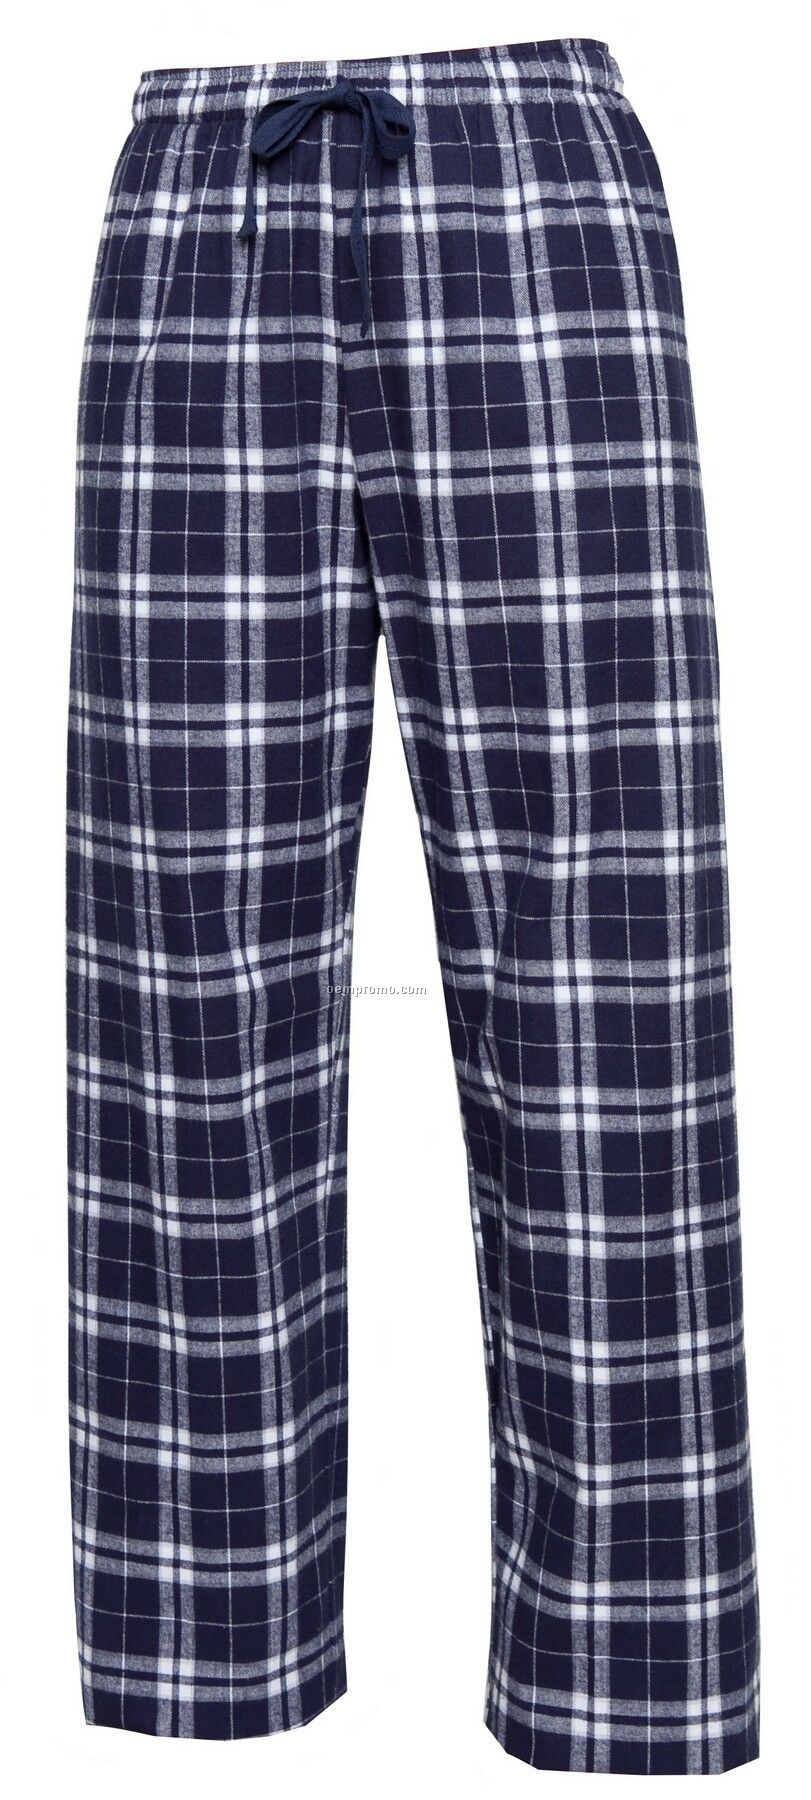 Youth Team Pride Flannel Pant In Navy Blue & Silver Plaid